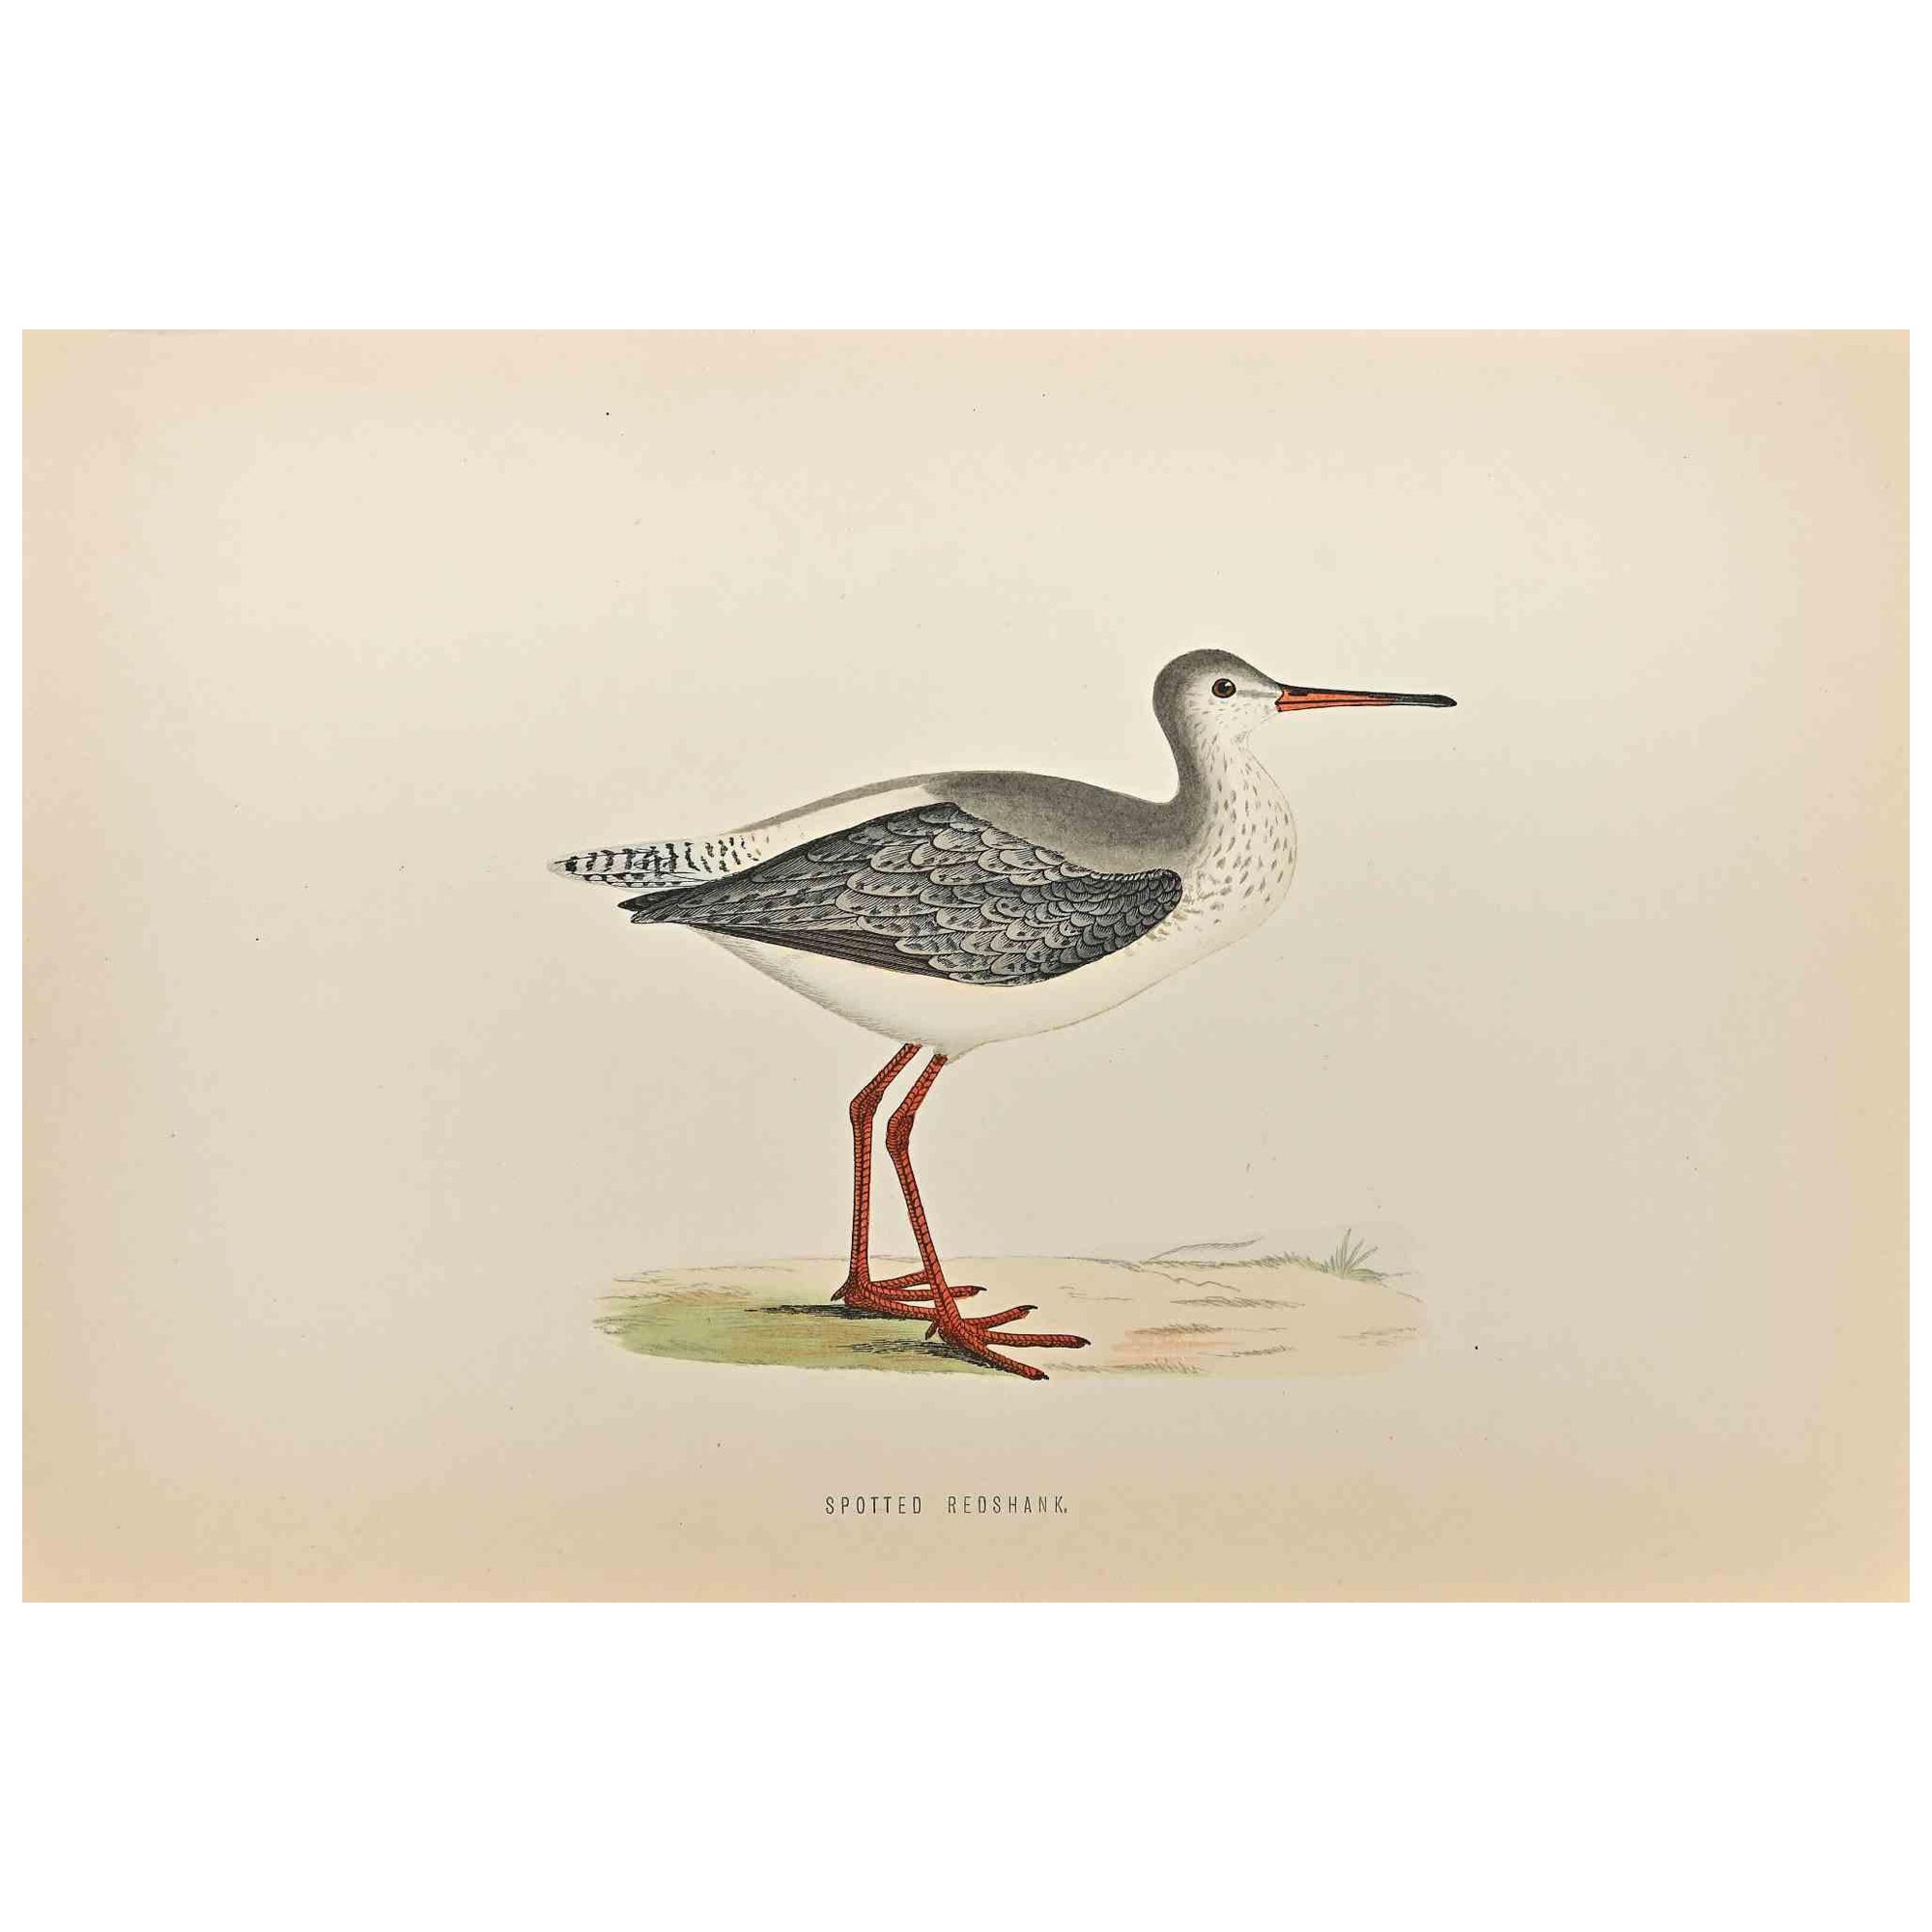 Spotted Redshank is a modern artwork realized in 1870 by the British artist Alexander Francis Lydon (1836-1917).

Woodcut print on ivory-colored paper.

Hand-colored, published by London, Bell & Sons, 1870.  

The name of the bird is printed on the